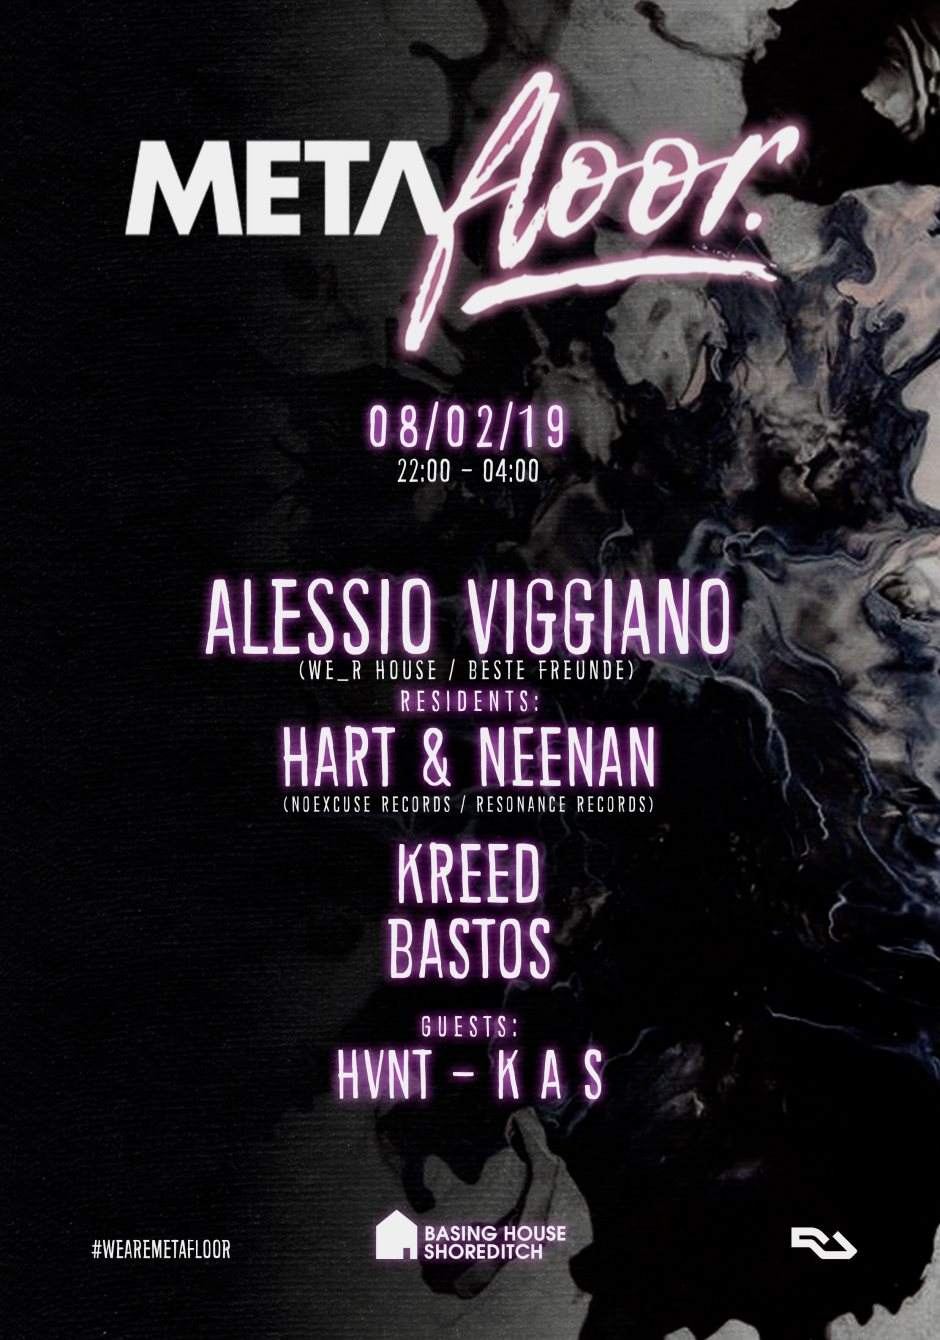 Metafloor - 2019 - with Alessio Viggiano (We_r House/ Beste Freunde), Residents & Guests - Página frontal